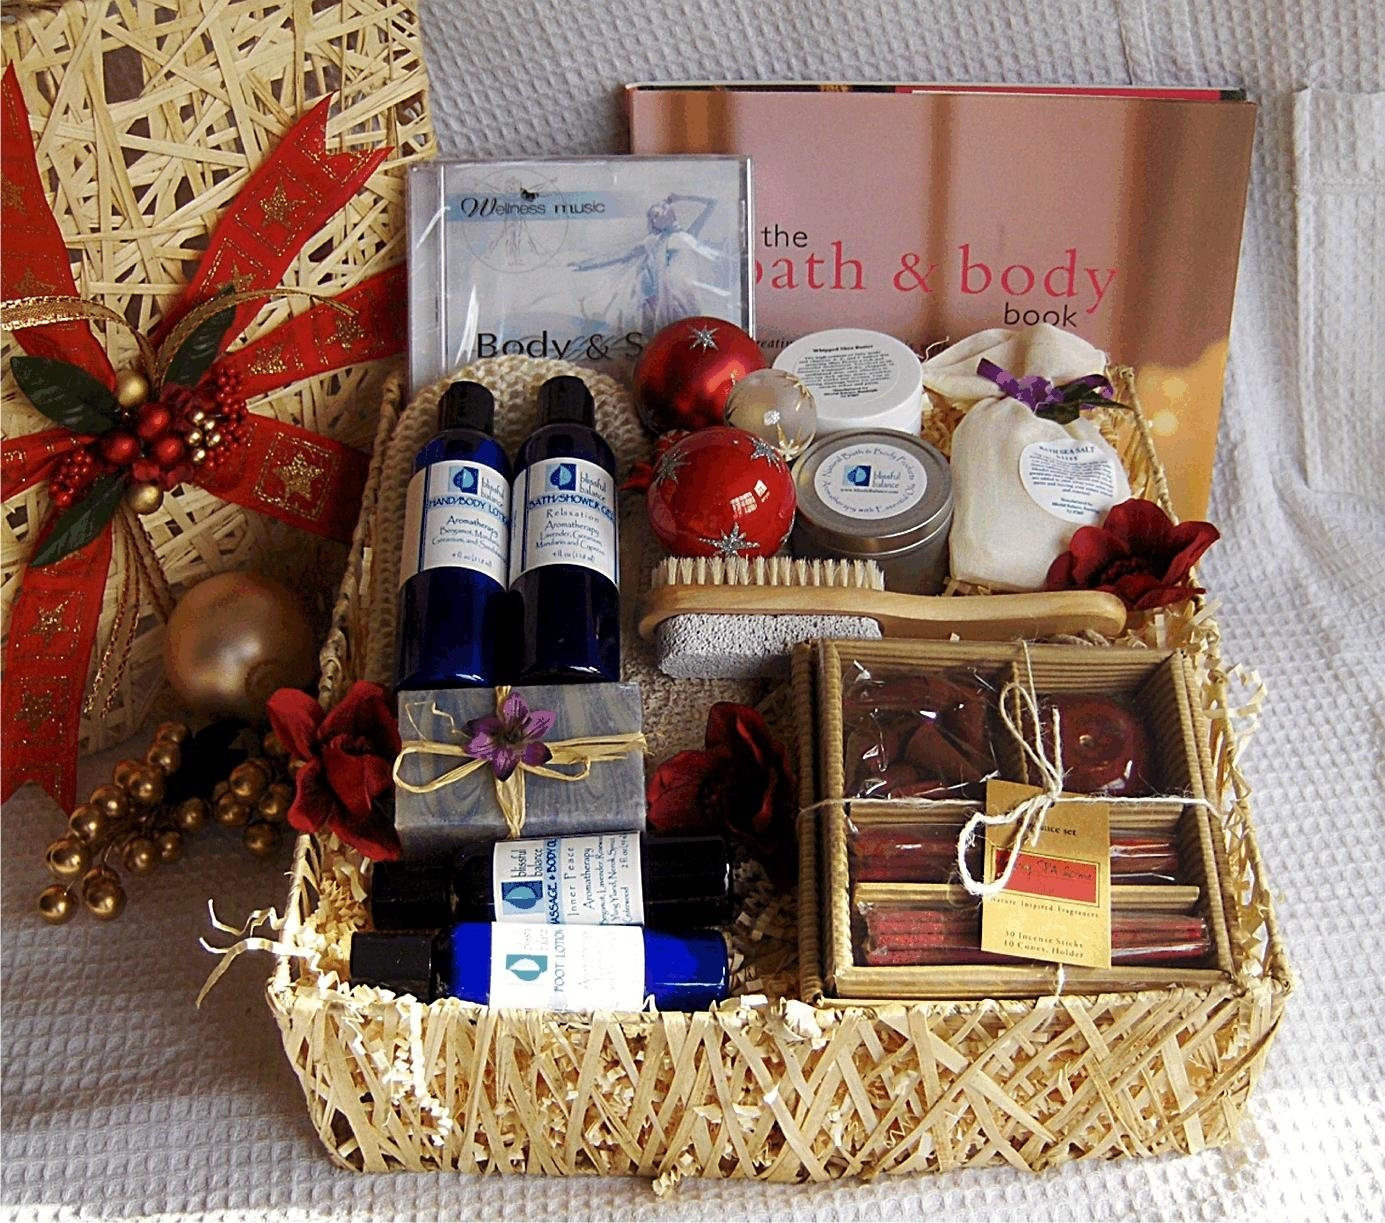 Fun Couples Gift Ideas
 10 Stylish Christmas Gift Basket Ideas For Couples 2020